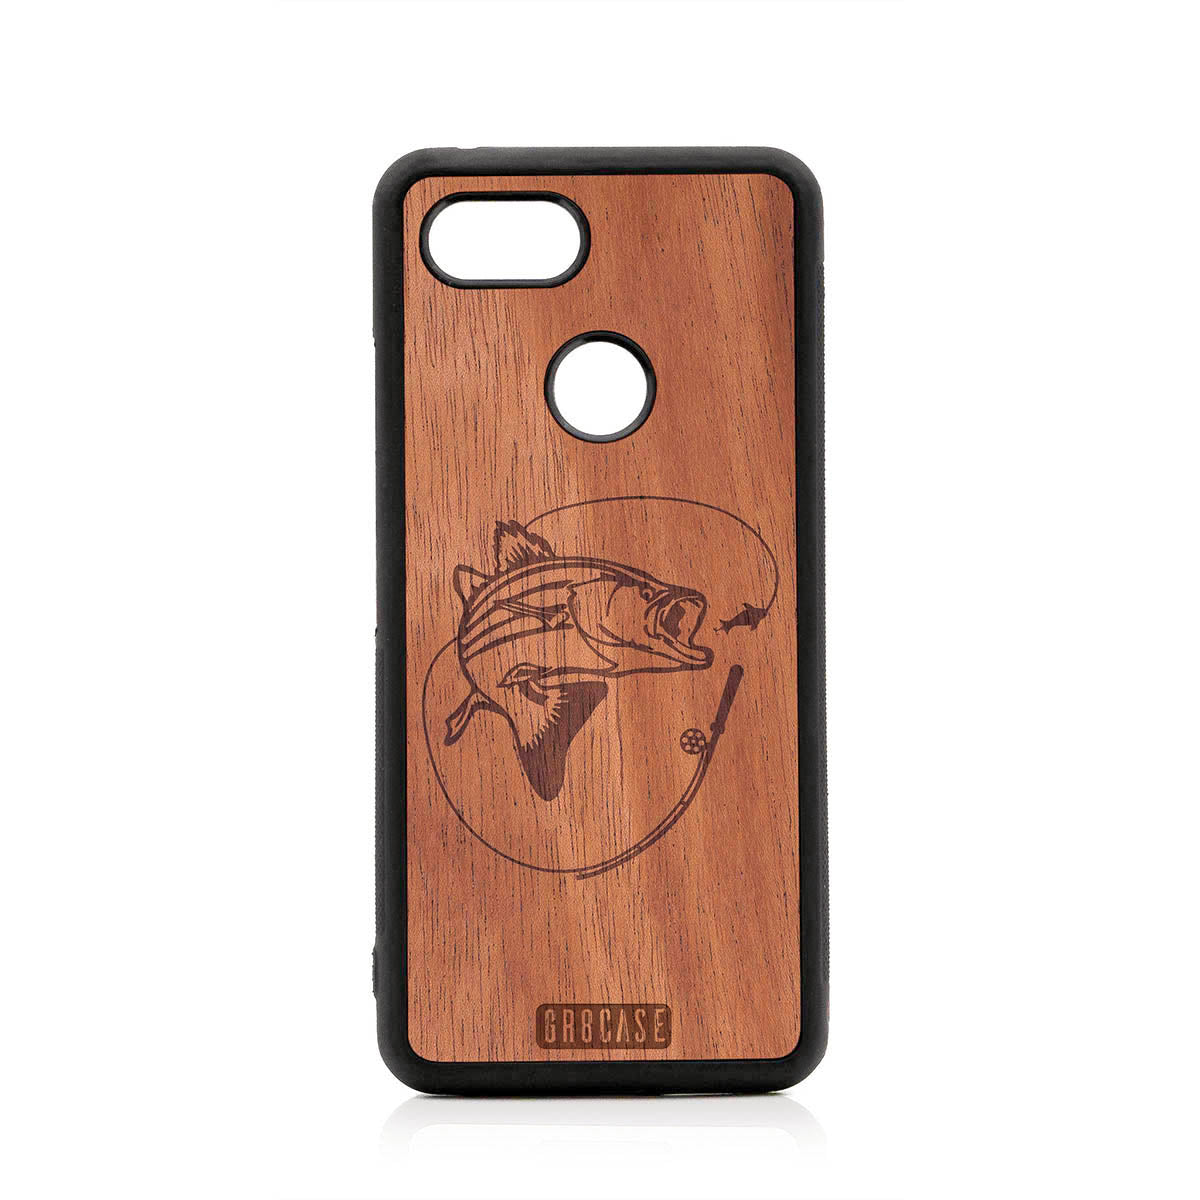 Fish and Reel Design Wood Case For Google Pixel 3 by GR8CASE